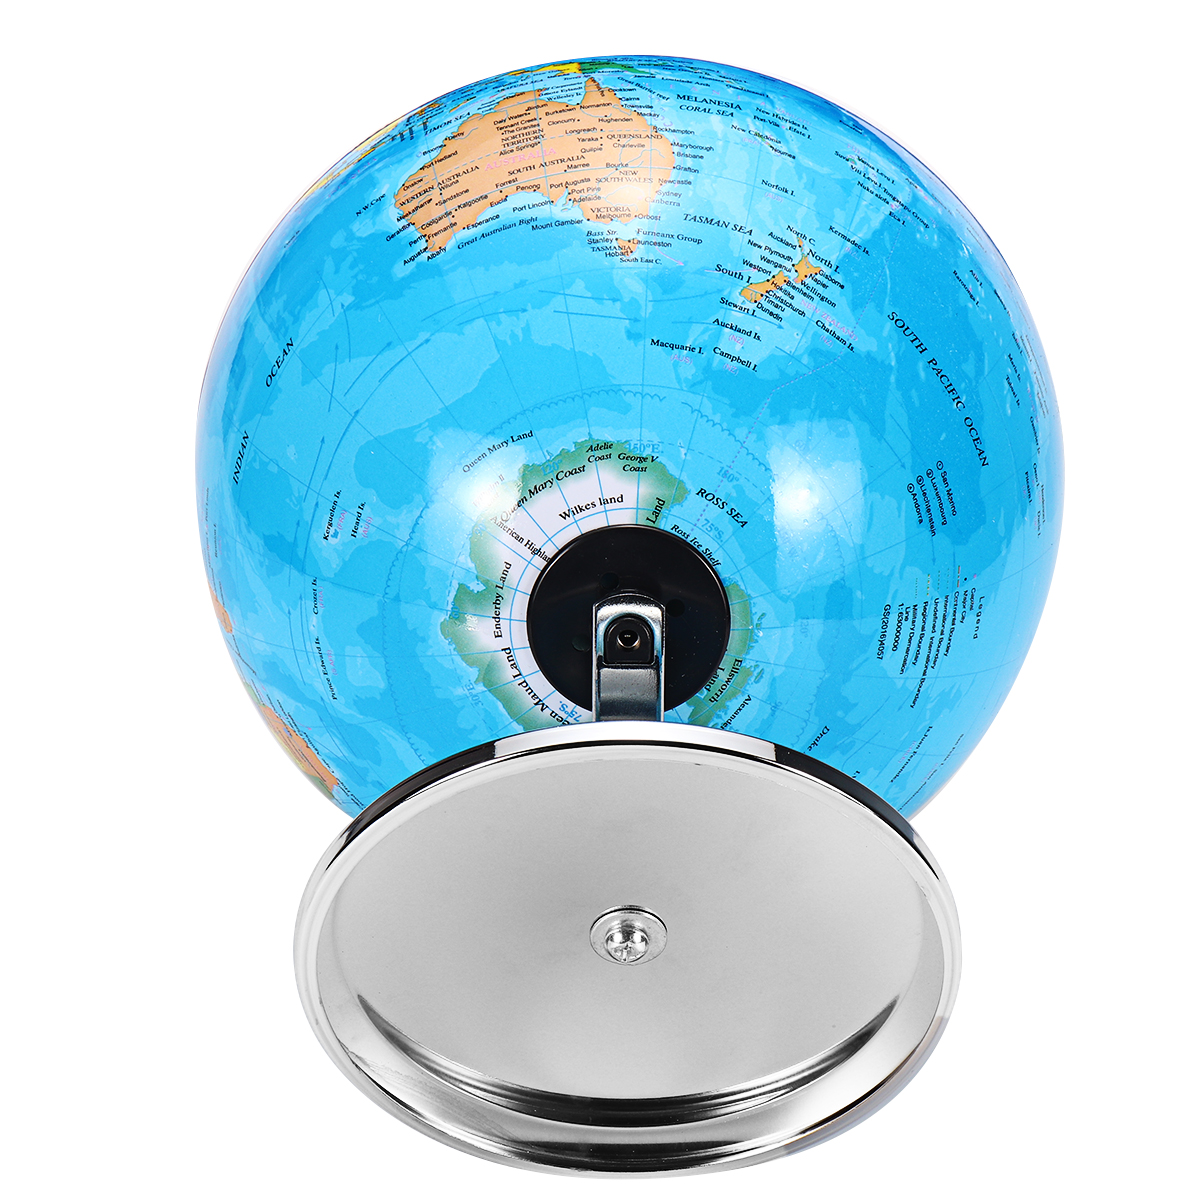 Find 8inch Stand Rotating World Globe Map Kids Toy School Student Educational Gift for Sale on Gipsybee.com with cryptocurrencies